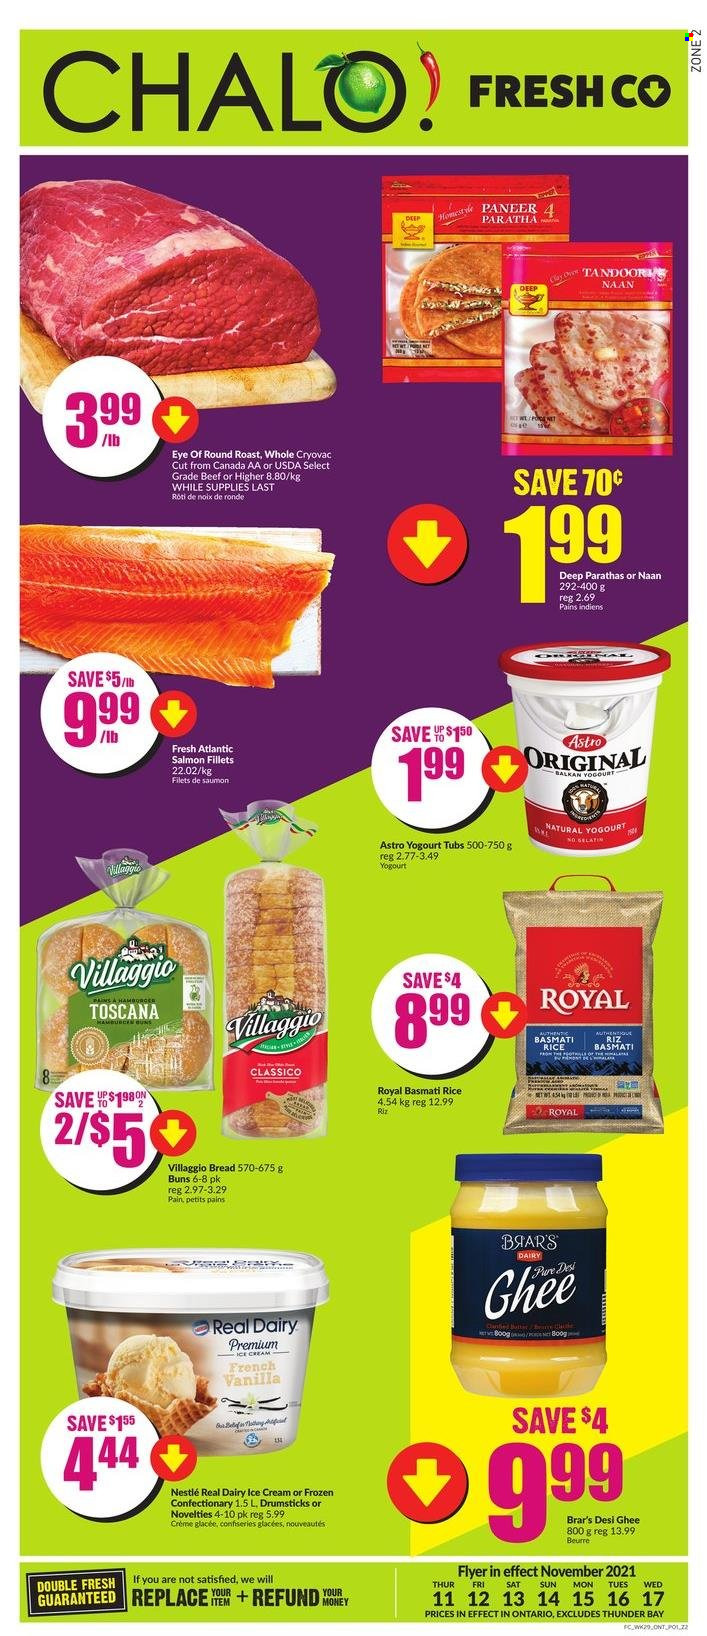 thumbnail - Chalo! FreshCo. Flyer - November 11, 2021 - November 17, 2021 - Sales products - bread, buns, salmon, salmon fillet, paneer, ghee, ice cream, basmati rice, rice, Classico, beef meat, eye of round, round roast, Nestlé. Page 1.